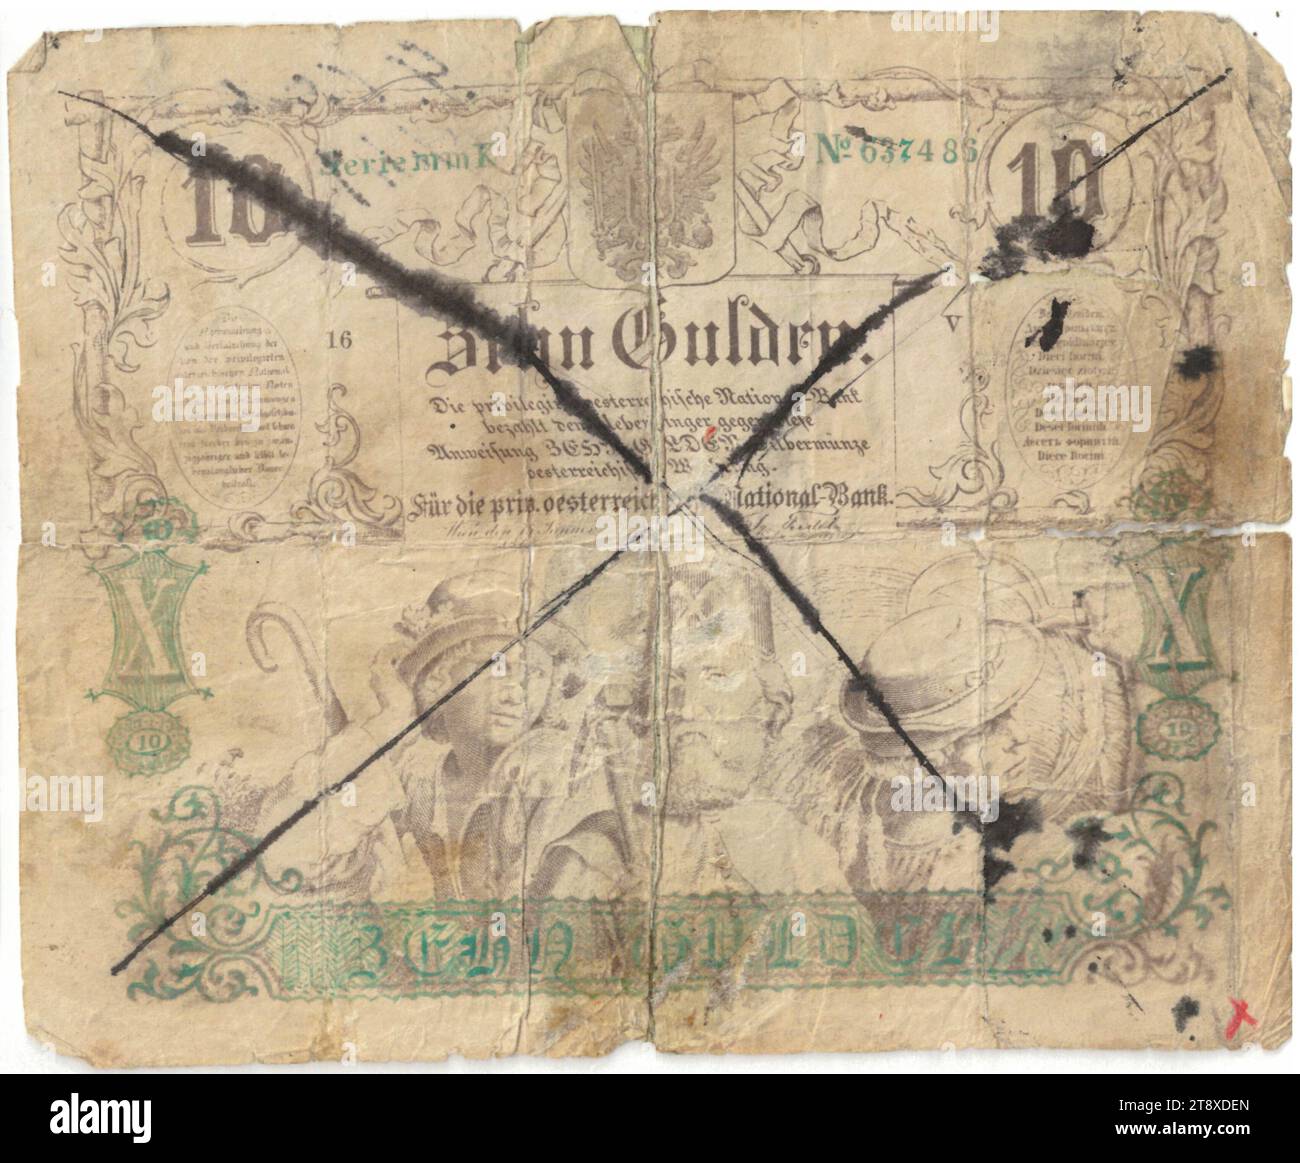 Banknote (forgery), 10 Gulden, Privilegierte Österreichische National-Bank, mint authority, Date after 15.01.1863, paper, printing, width 140 mm, height 115 mm, Mint, Vienna, Mint territory, Austria, Empire (1804-1867), Finance, counterfeit, forgery, farmers, working class, laborers, coat of arms (as symbol of the state, etc.), bank-note, money, The Vienna Collection Stock Photo